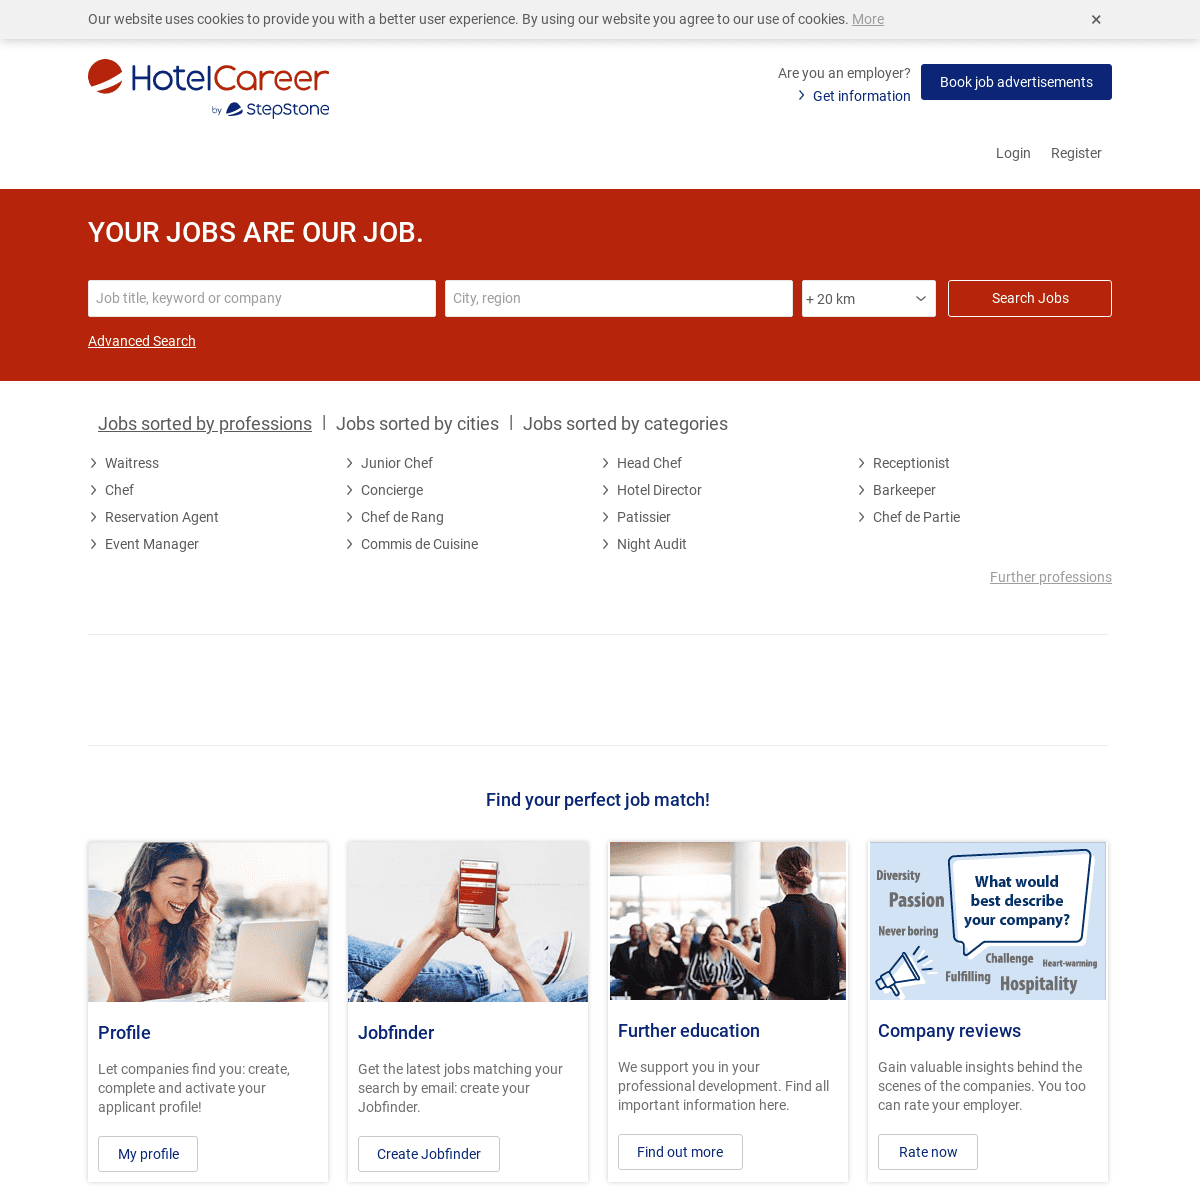 A complete backup of https://hotelcareer.com